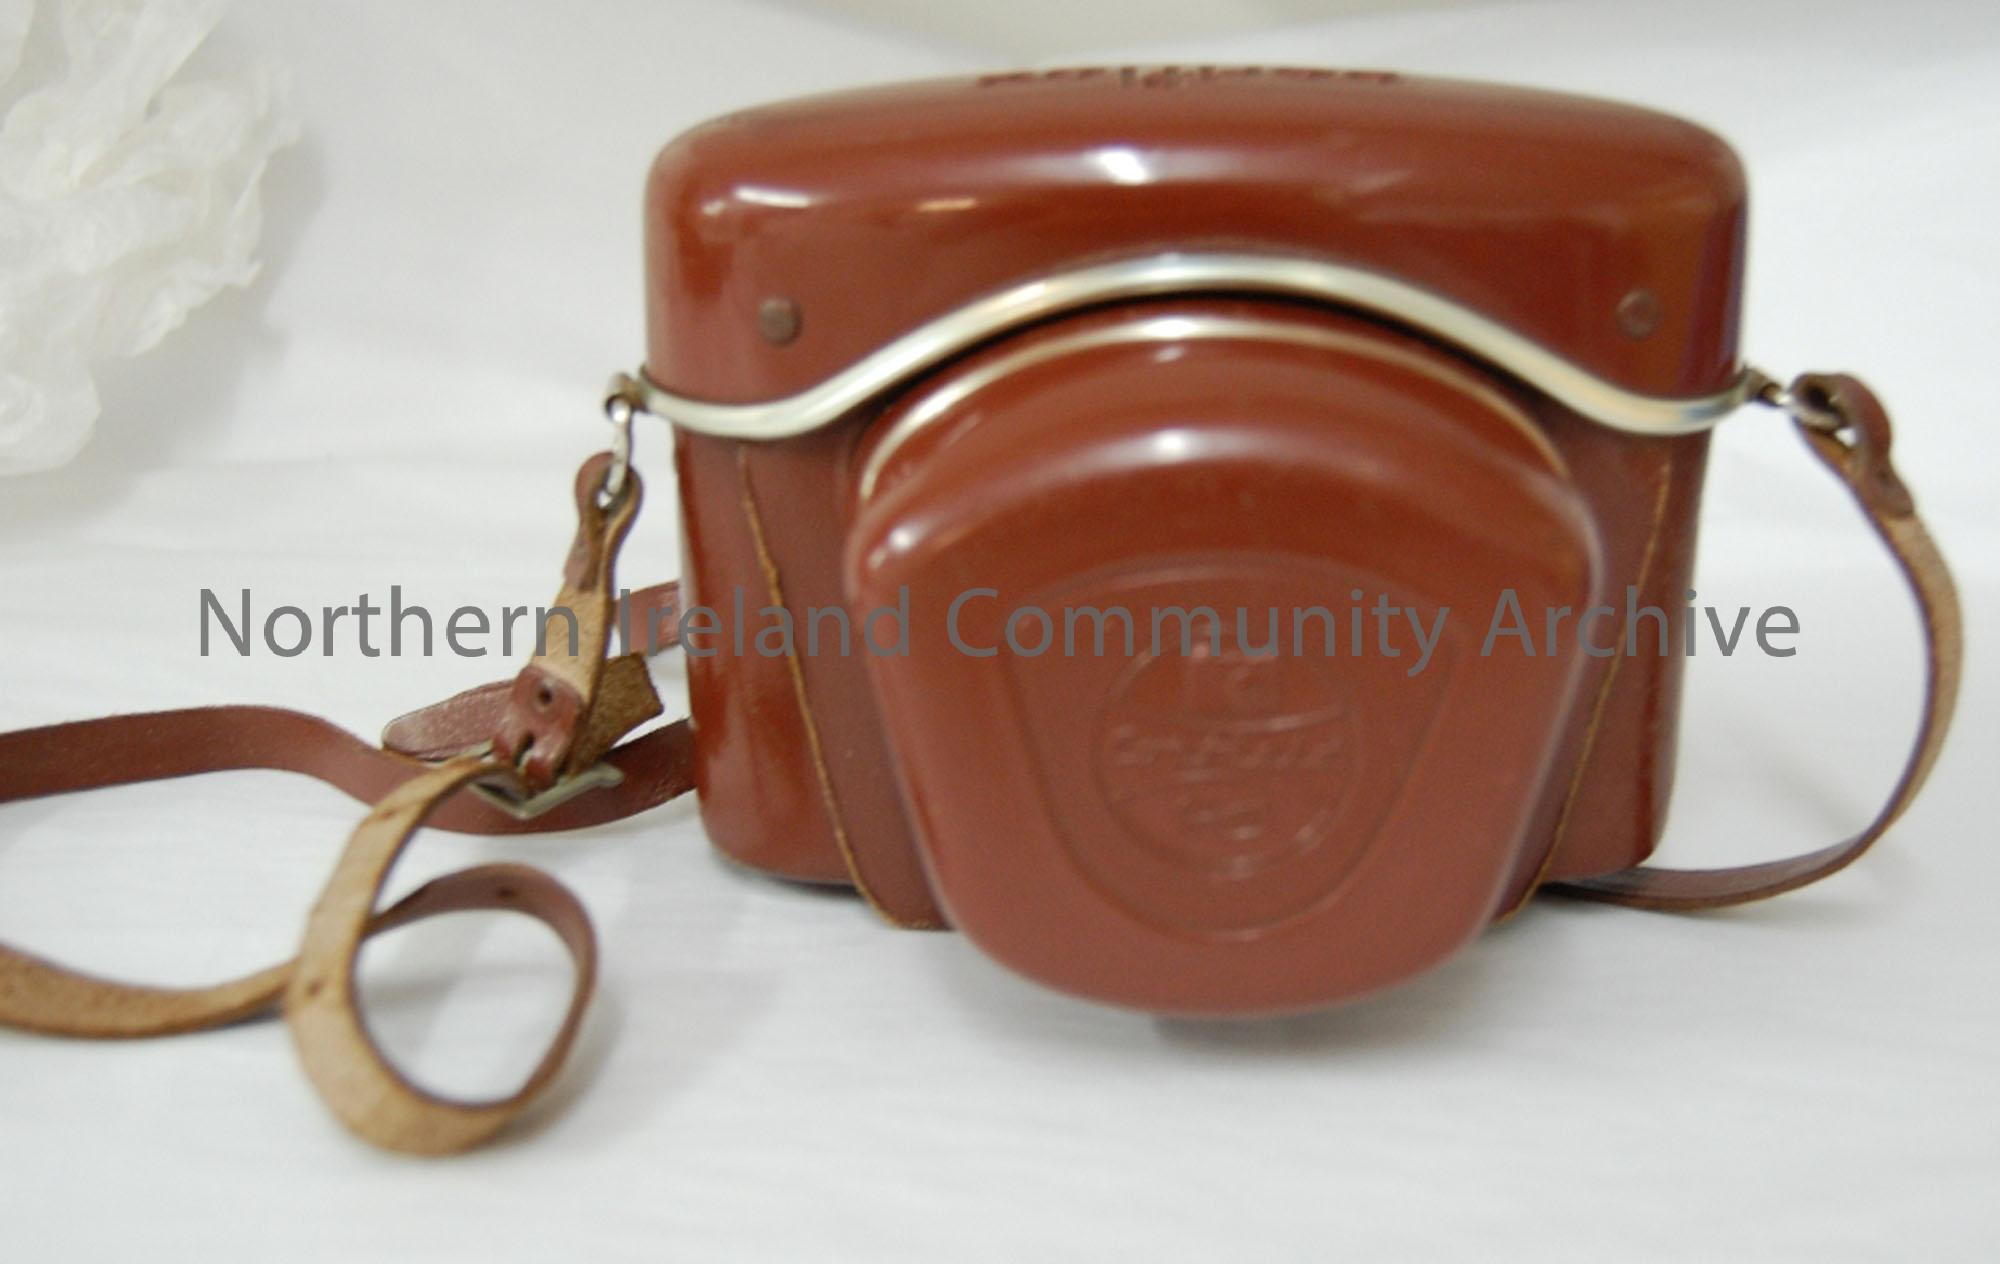 Corfield Periflex Gold star camera case with Lumax lens. Camera is accessioned as BHC:2013.78